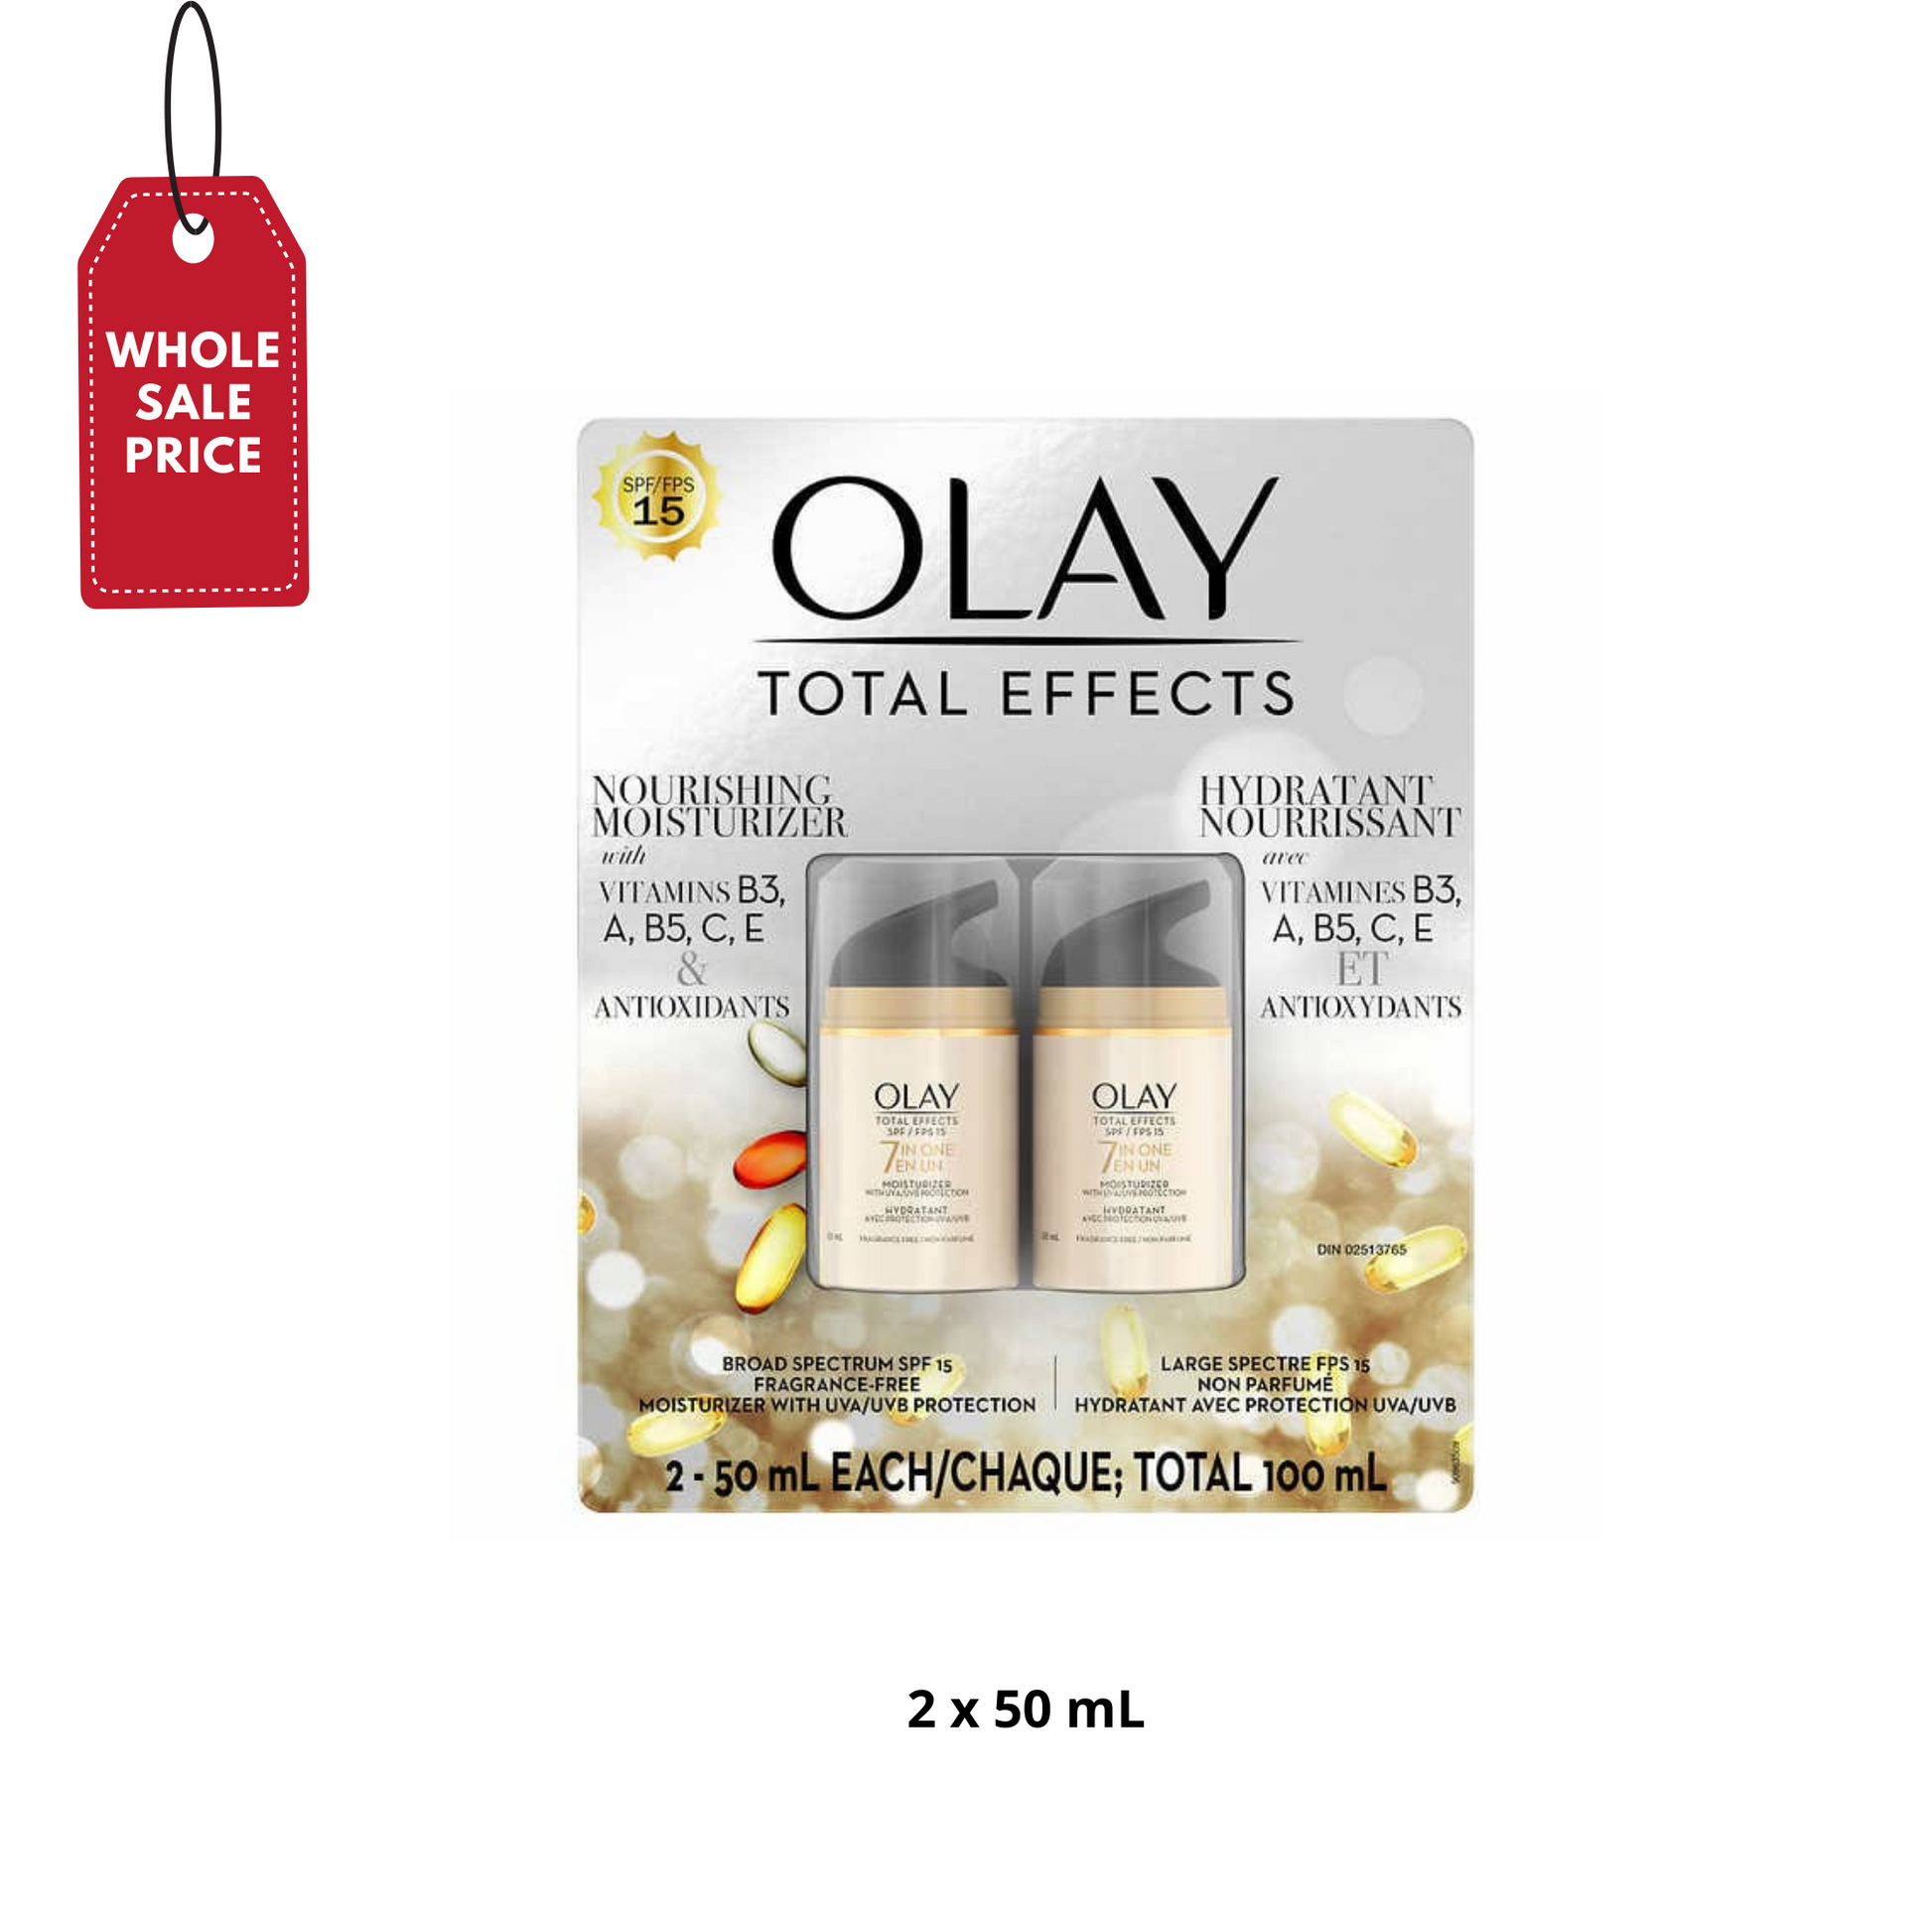 Olay Total Effects Face Moisturizer SPF 15 - 7 in one 2 x 50 mL - canavitam